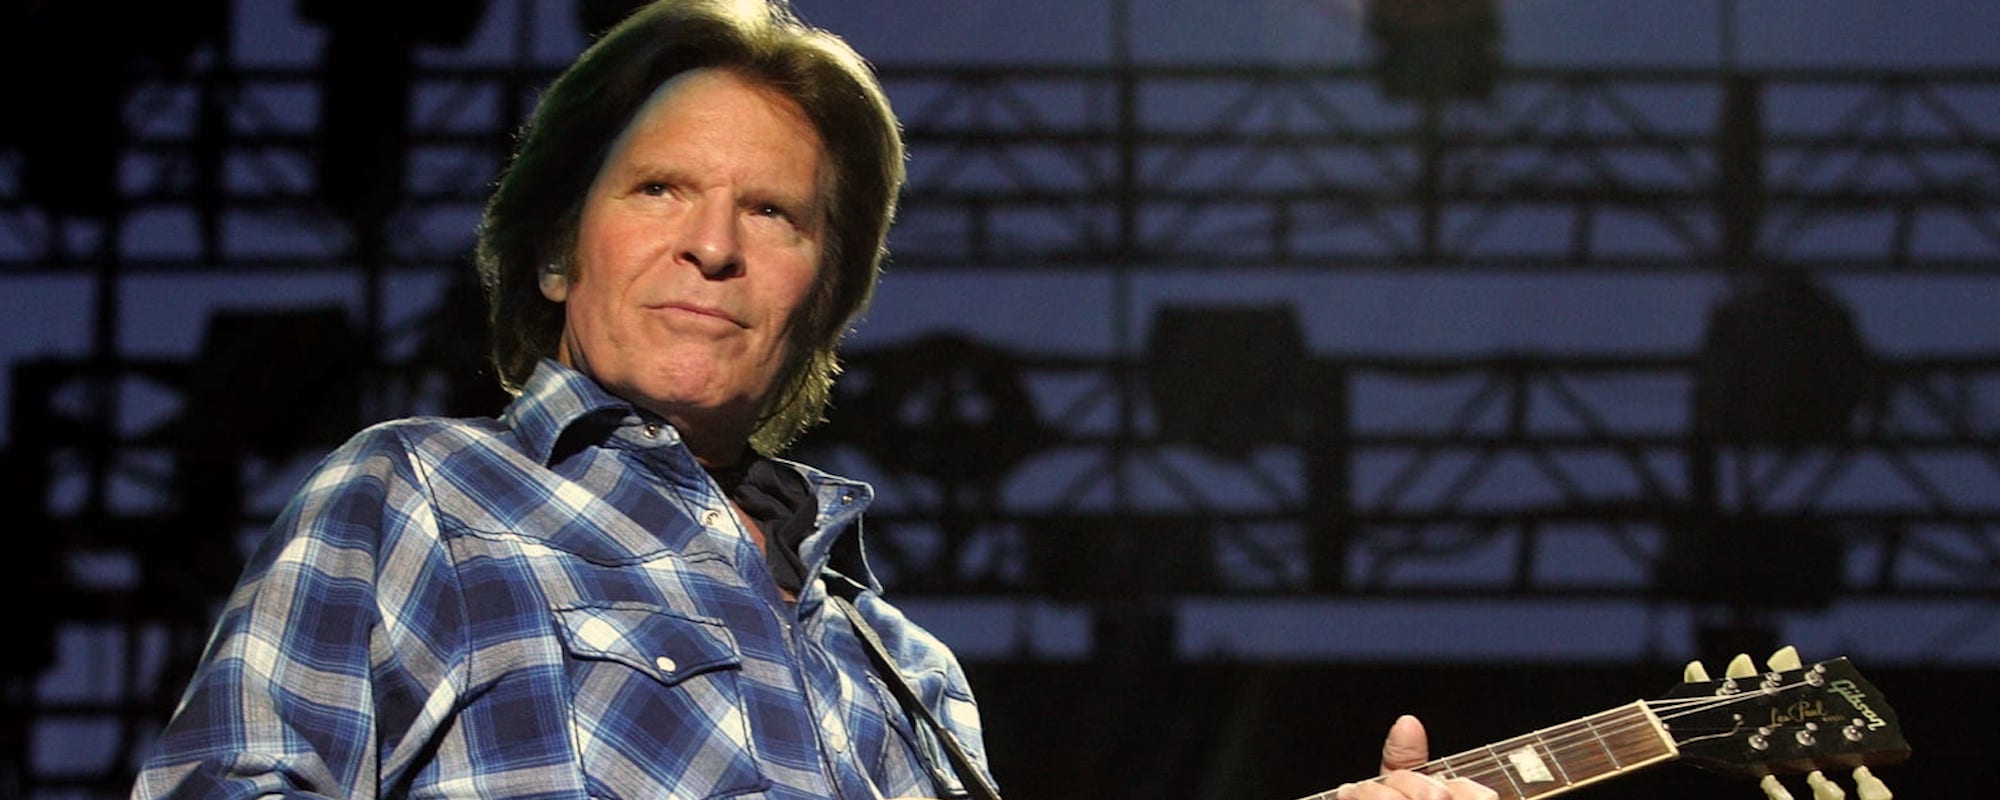 Behind the Song Lyrics: “The Old Man Down the Road” by John Fogerty